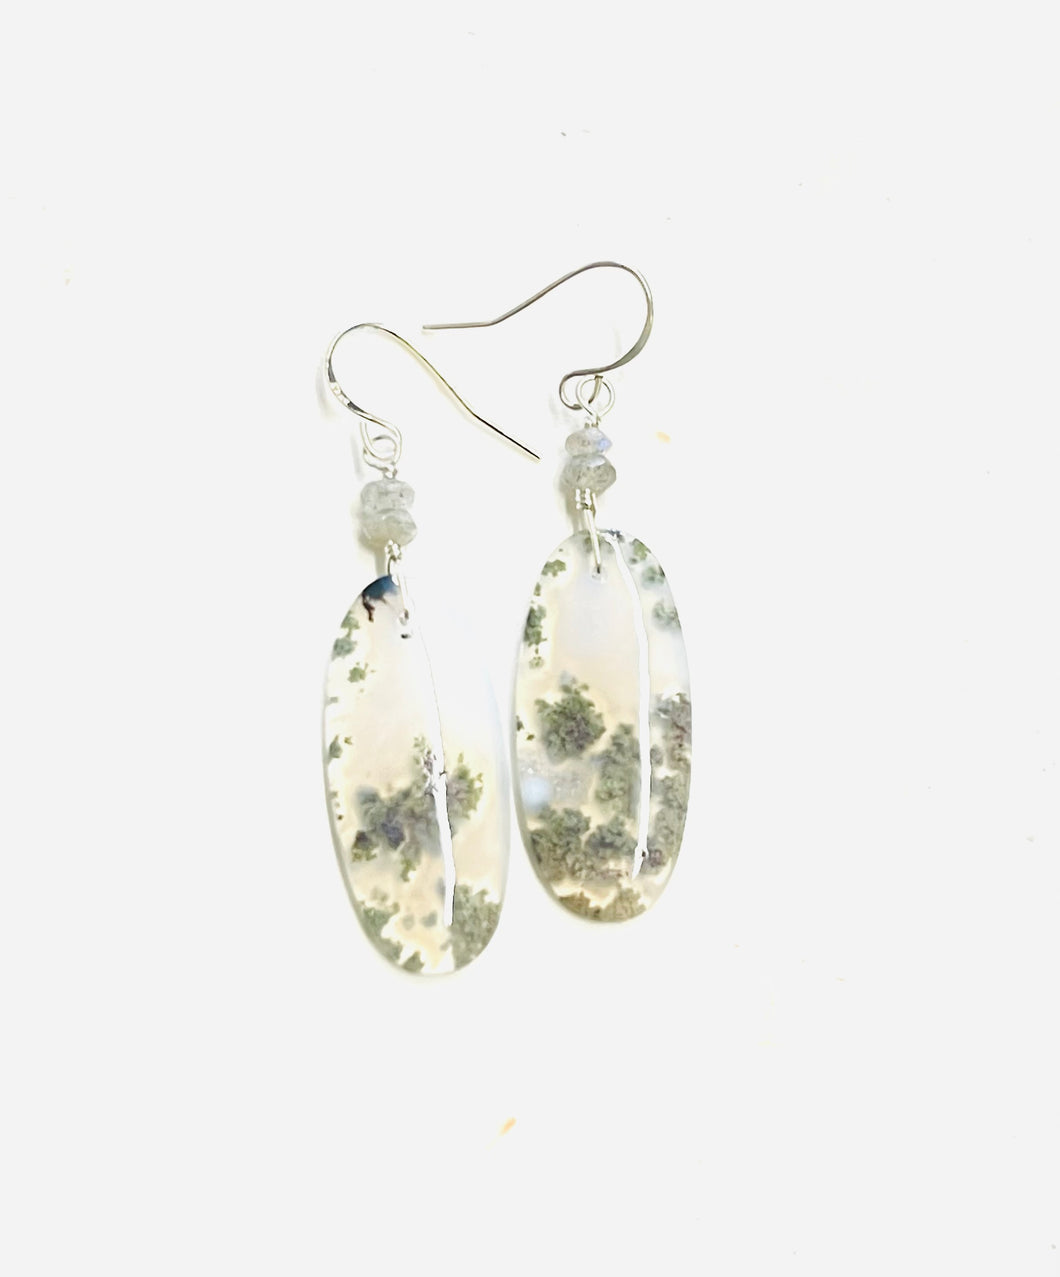 Earrings with translucent green moss agate